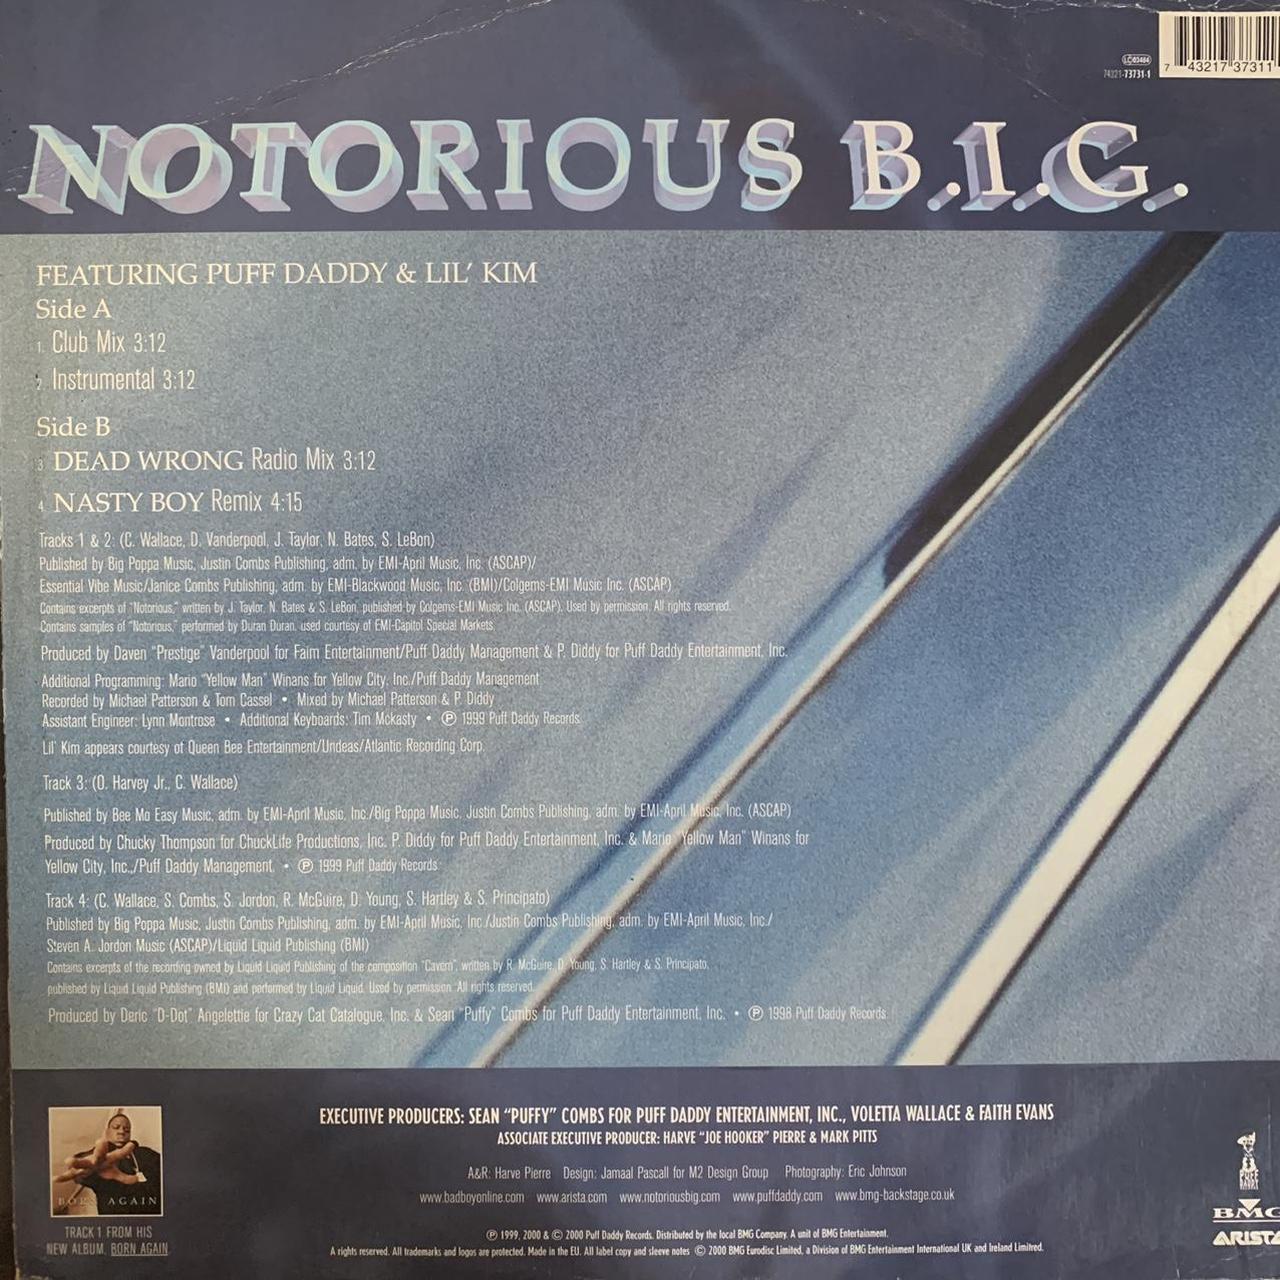 The Notorious B.I.G. “Notorious BIG” 3 Track 12inch Vinyl